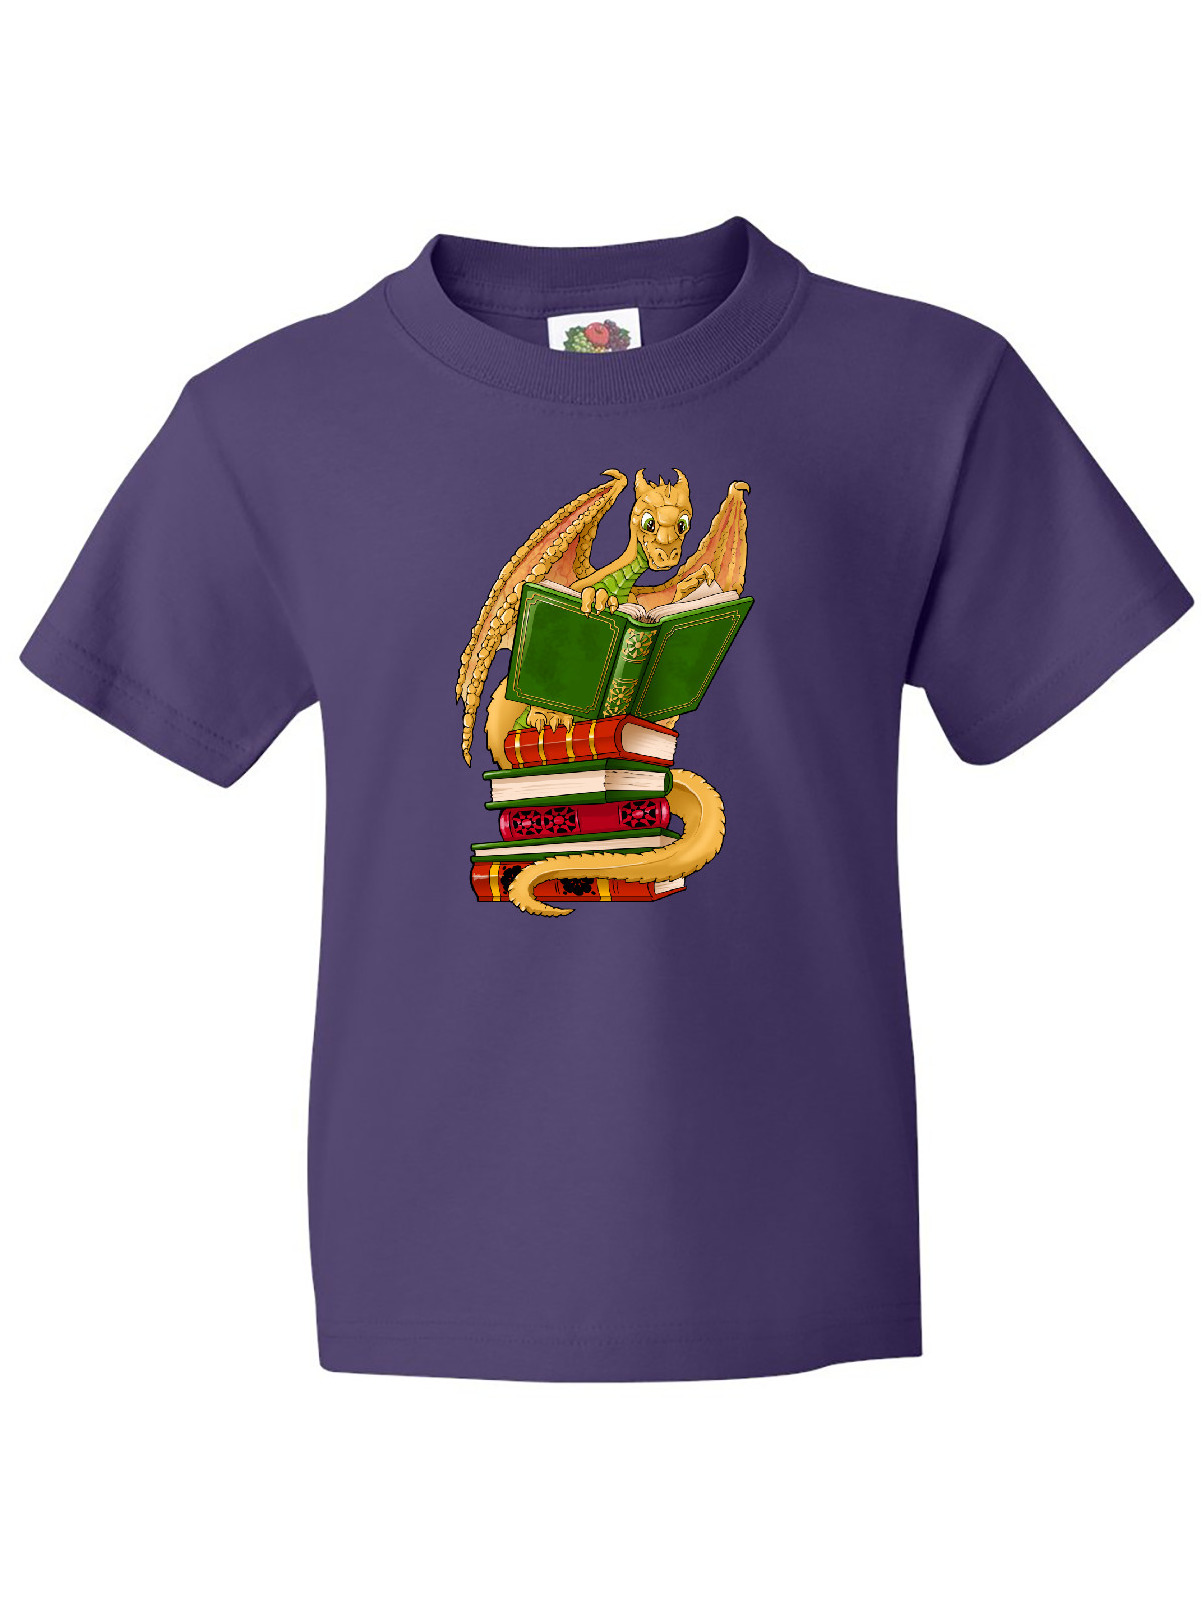 Inktastic Well-read Cute Gold Dragon Reading Books Youth T-Shirt - image 1 of 4